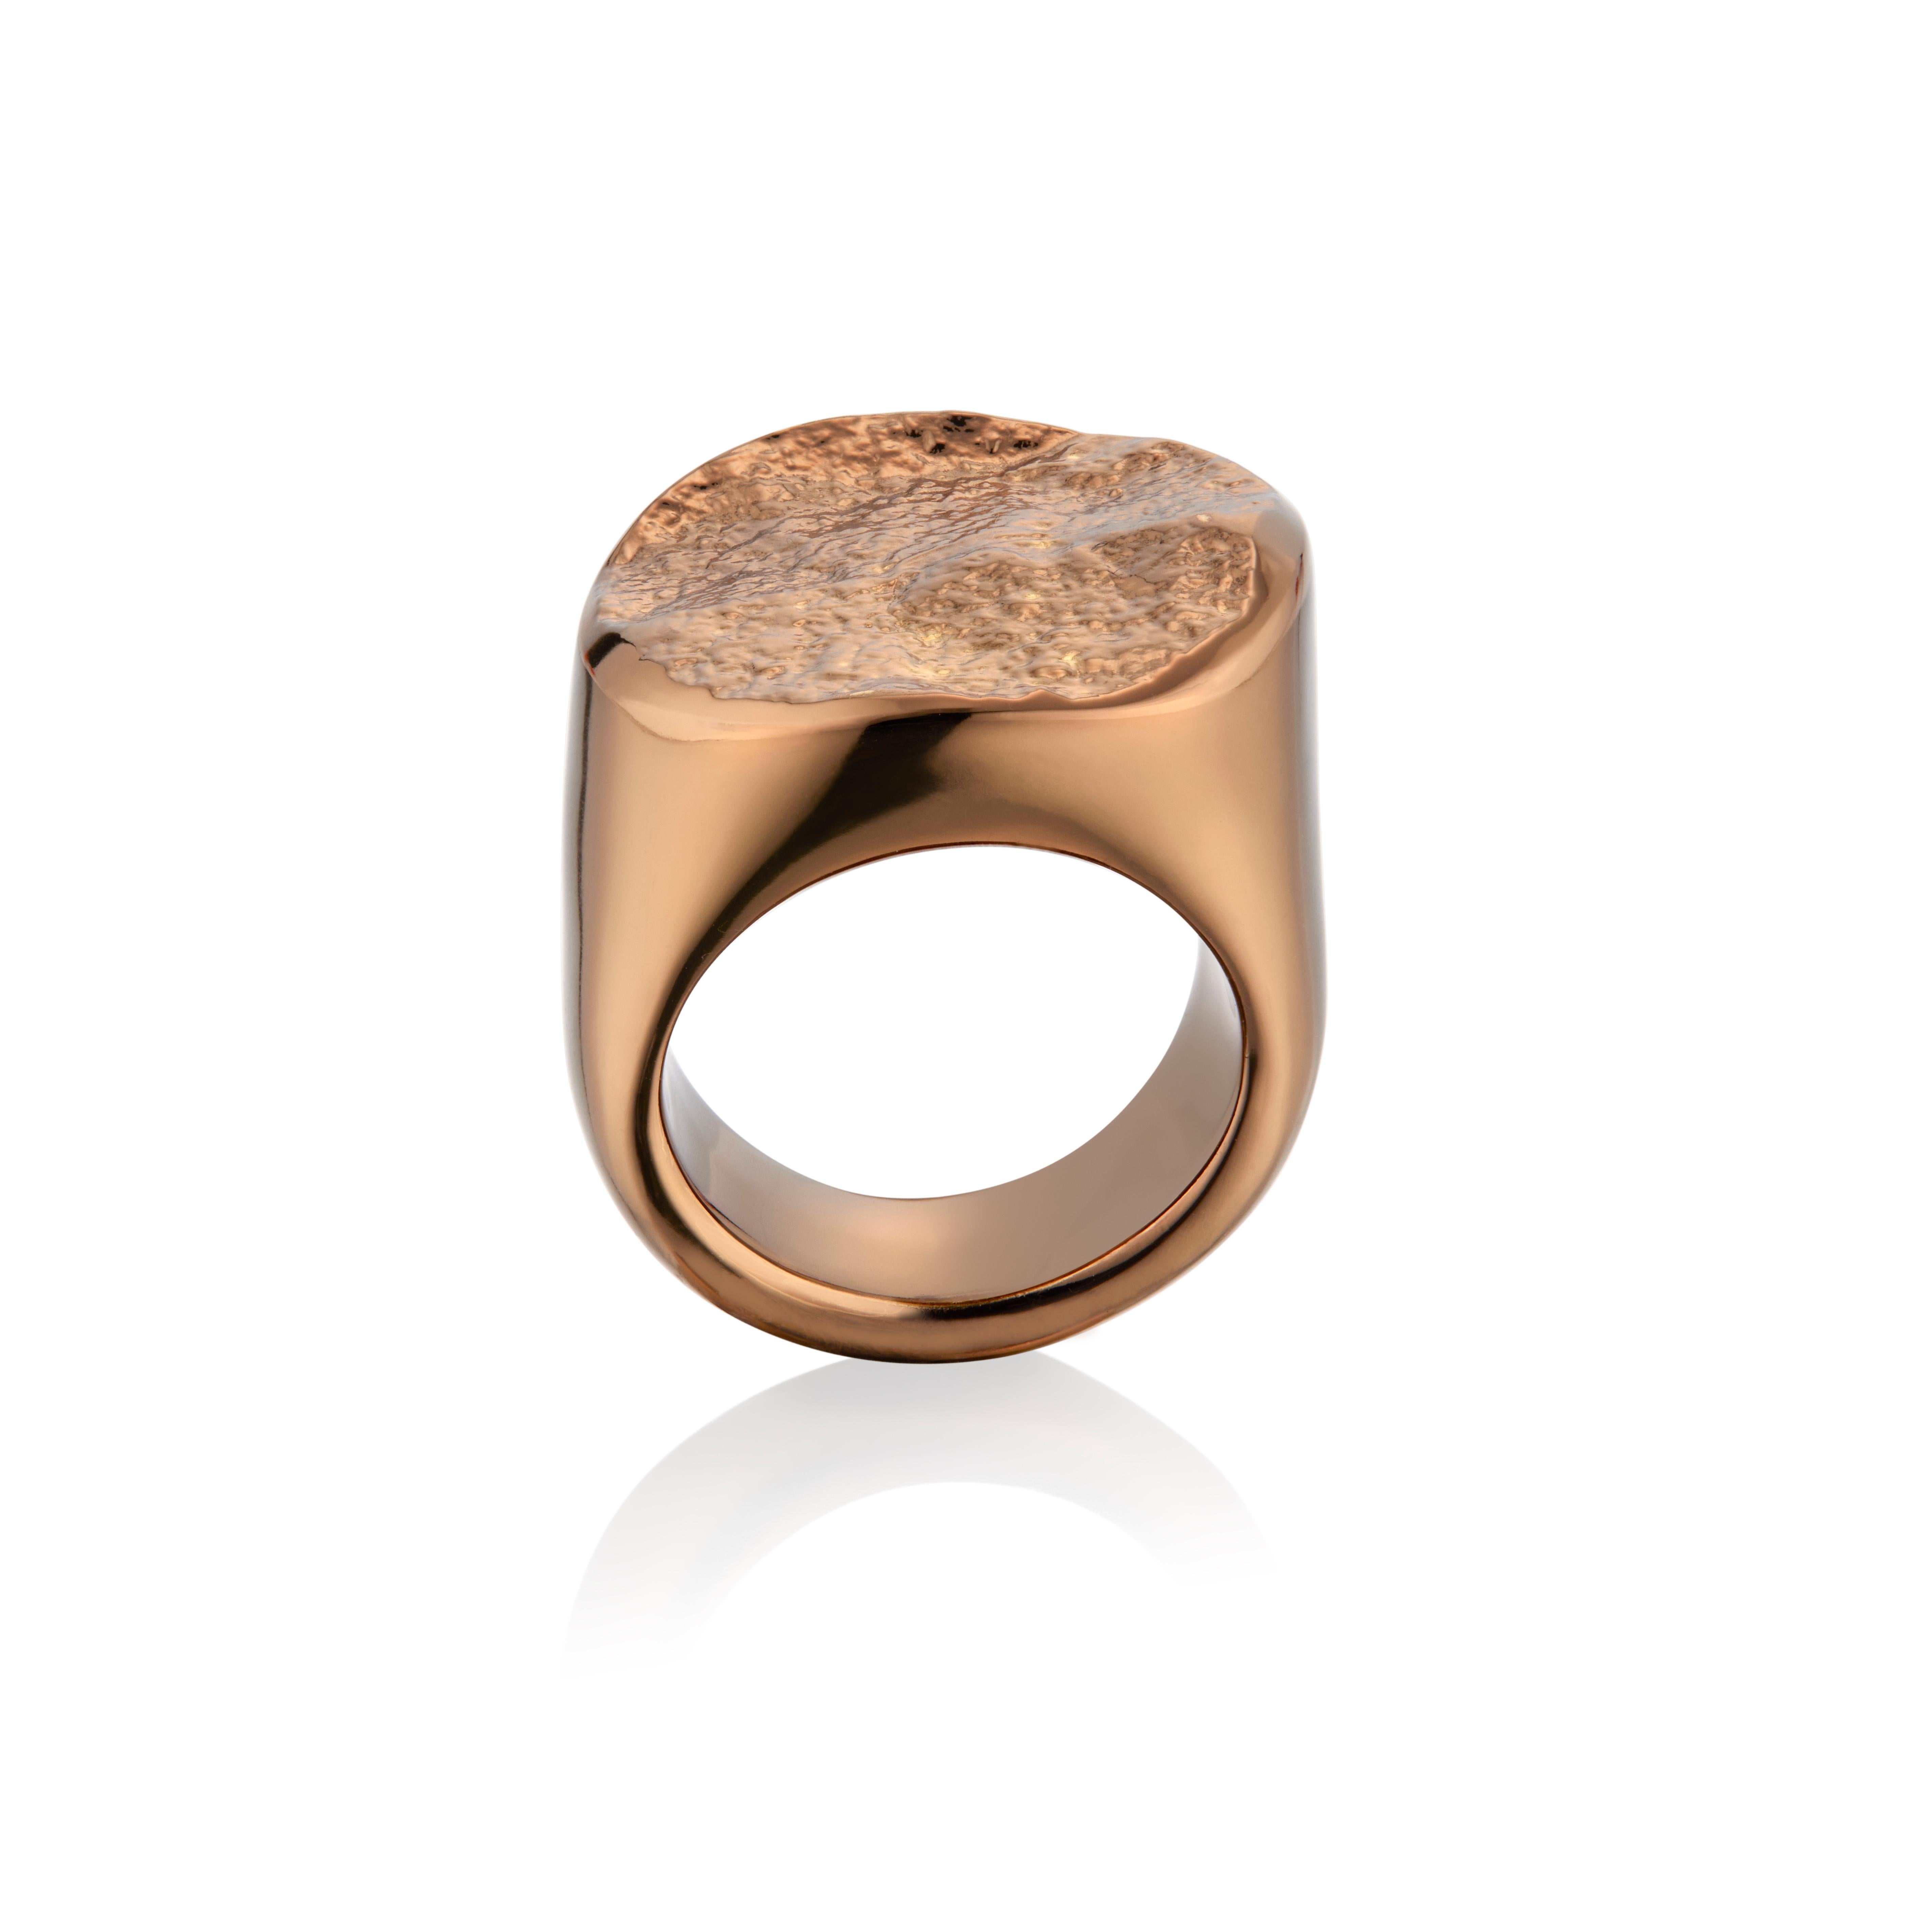 This Signet Ring is like no other with its smooth high polished bottom and the contrast of a spongy textured top, making it a beautiful statement piece for anyone.

This piece is a part of our chocolate gold collection

Size 7- Ring Size is